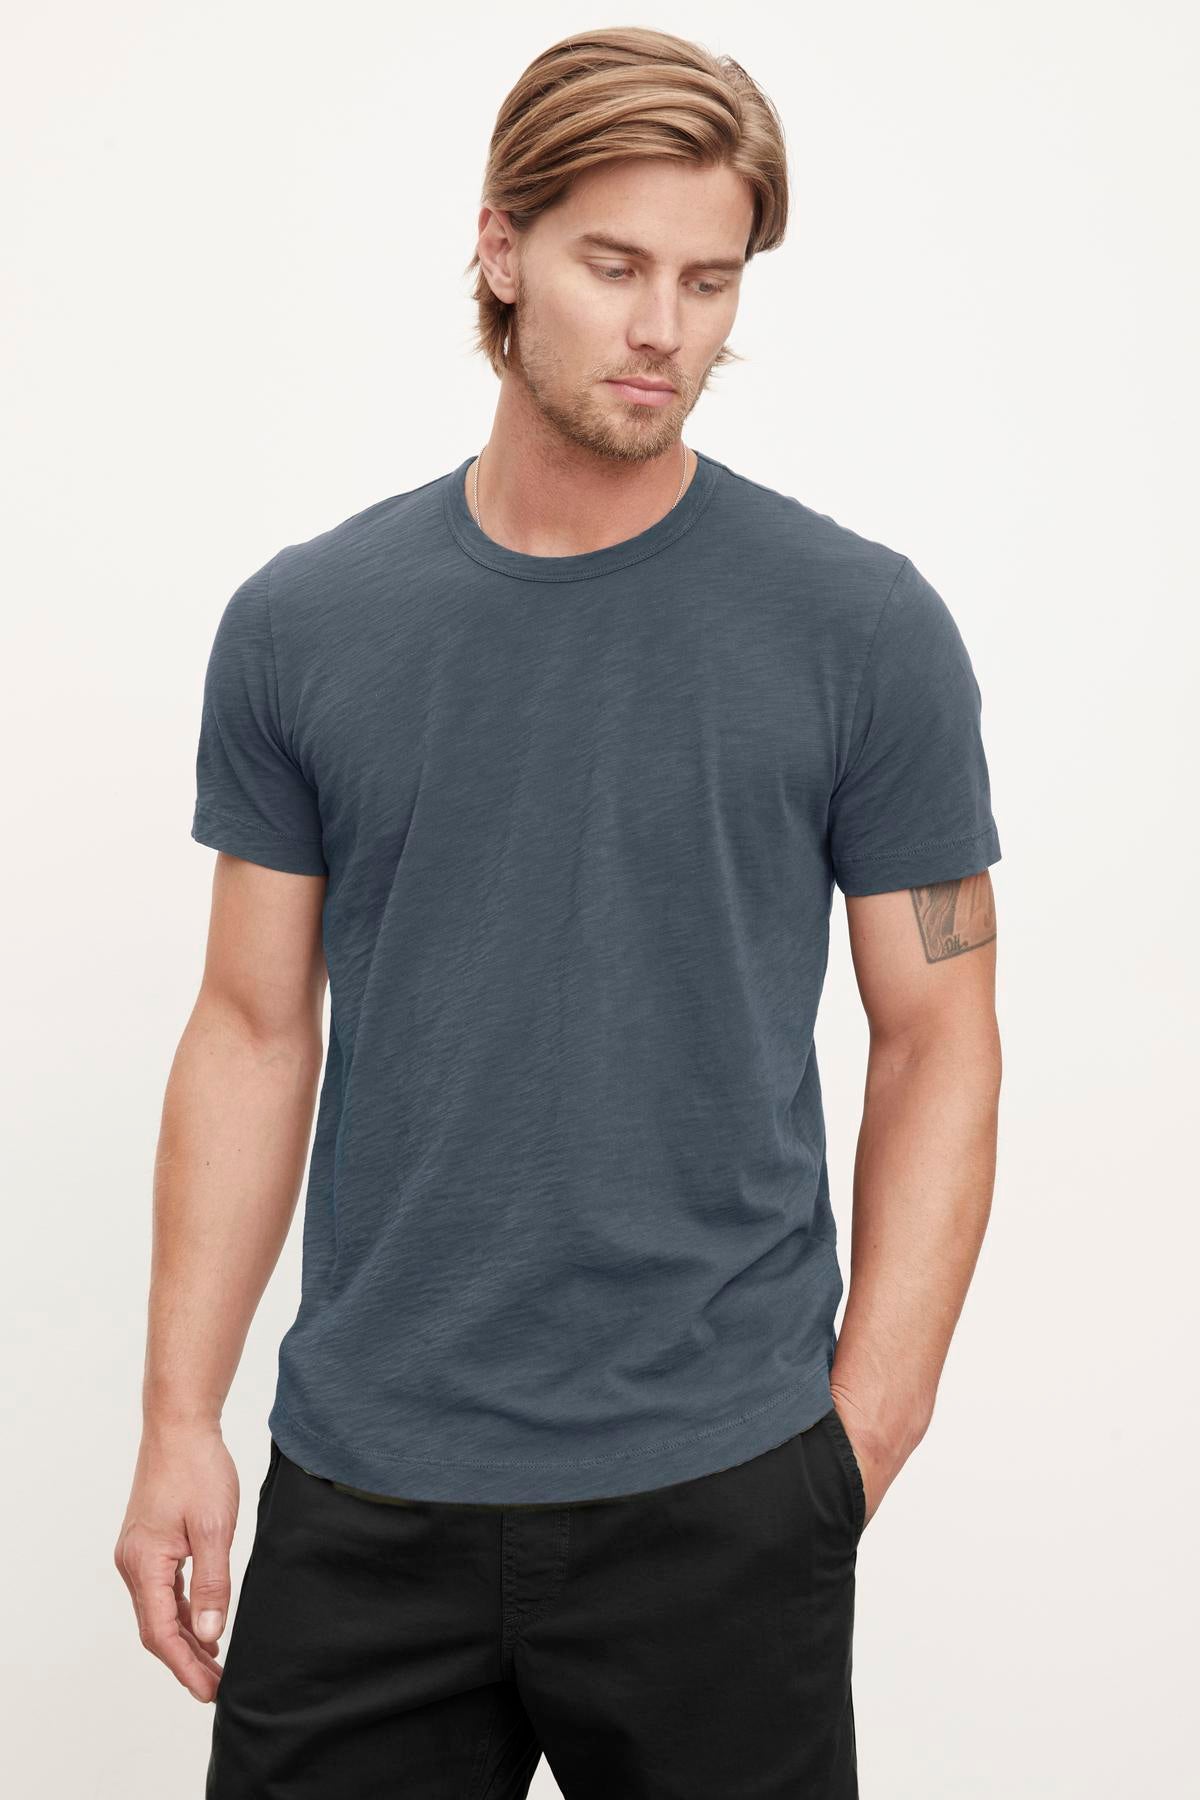   A person with long hair wearing a relaxed stylish feel, casual, short-sleeved dark gray Velvet by Graham & Spencer AMARO TEE and black pants stands against a plain light background. They have a neutral expression and a tattoo on their left arm. 